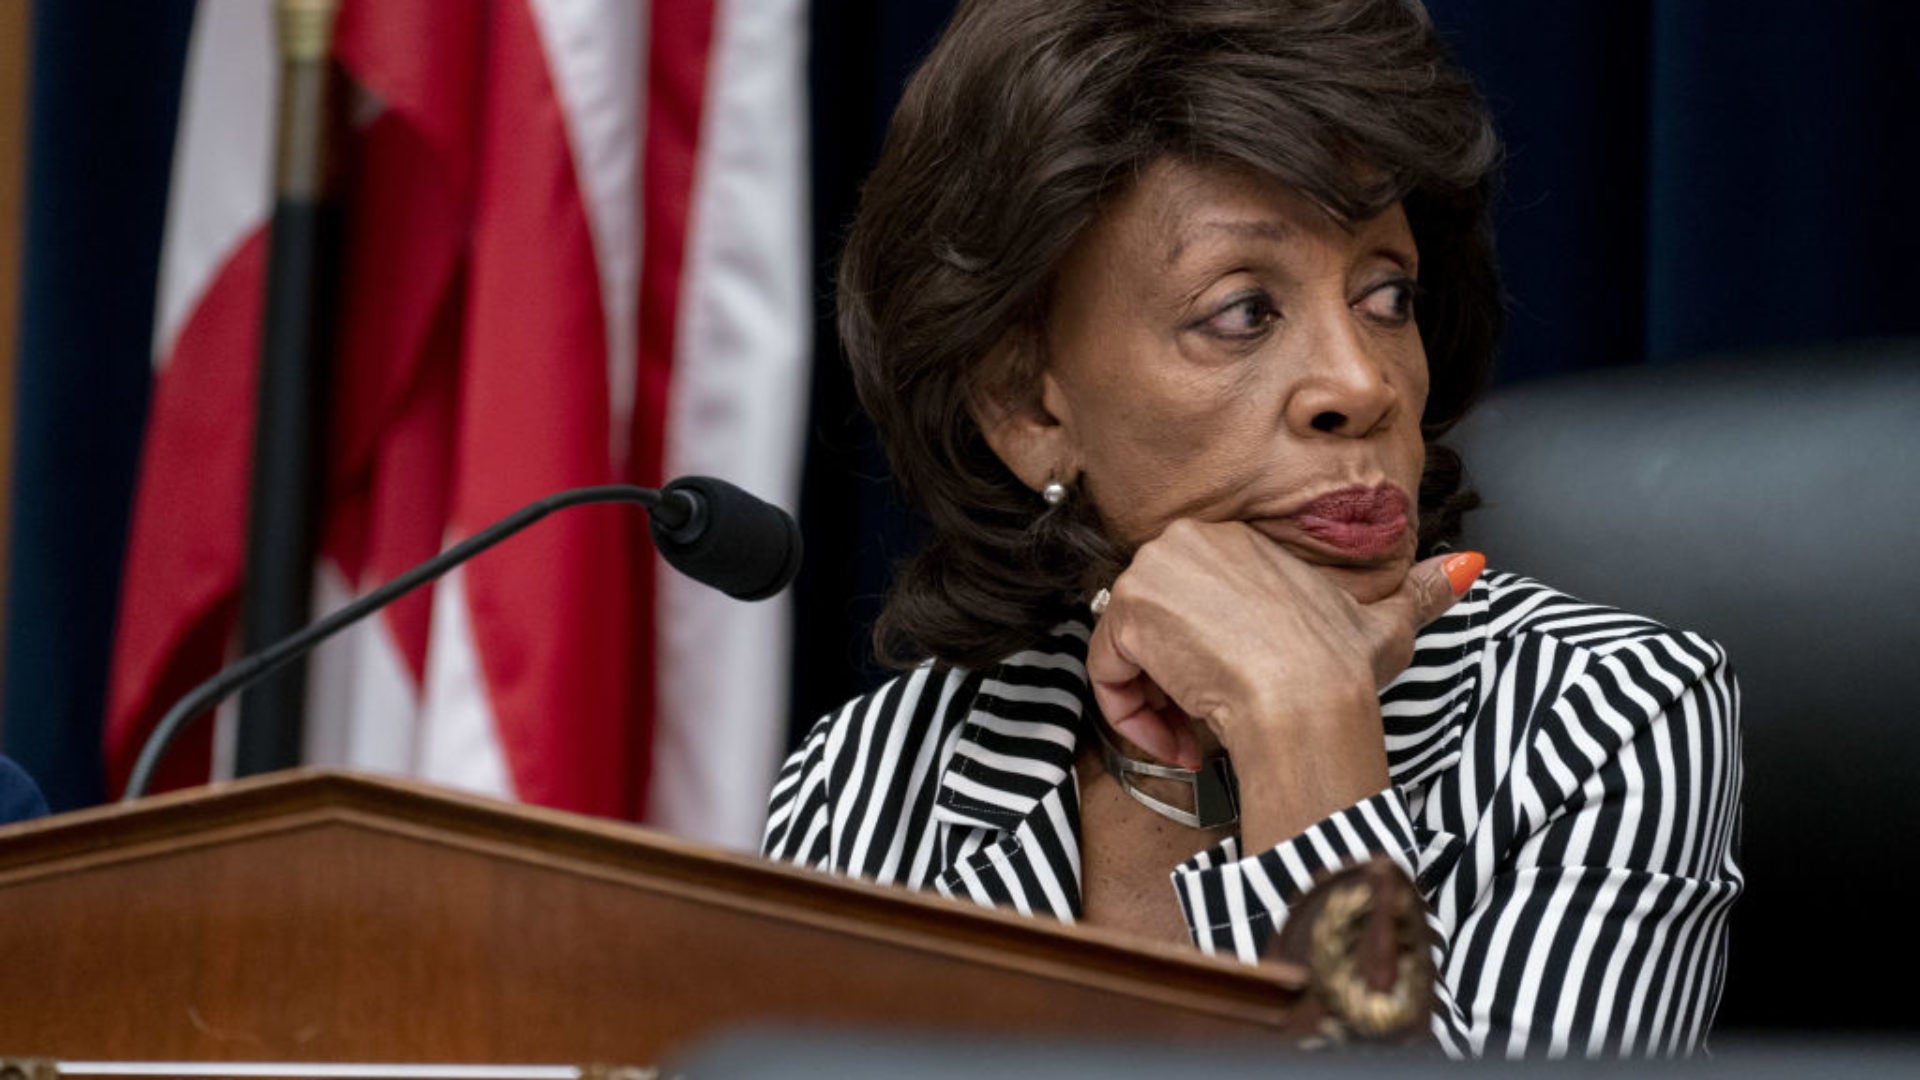 Rep. Maxine Waters, The First To Call For Impeachment, Discusses Trump And Impeachment Process